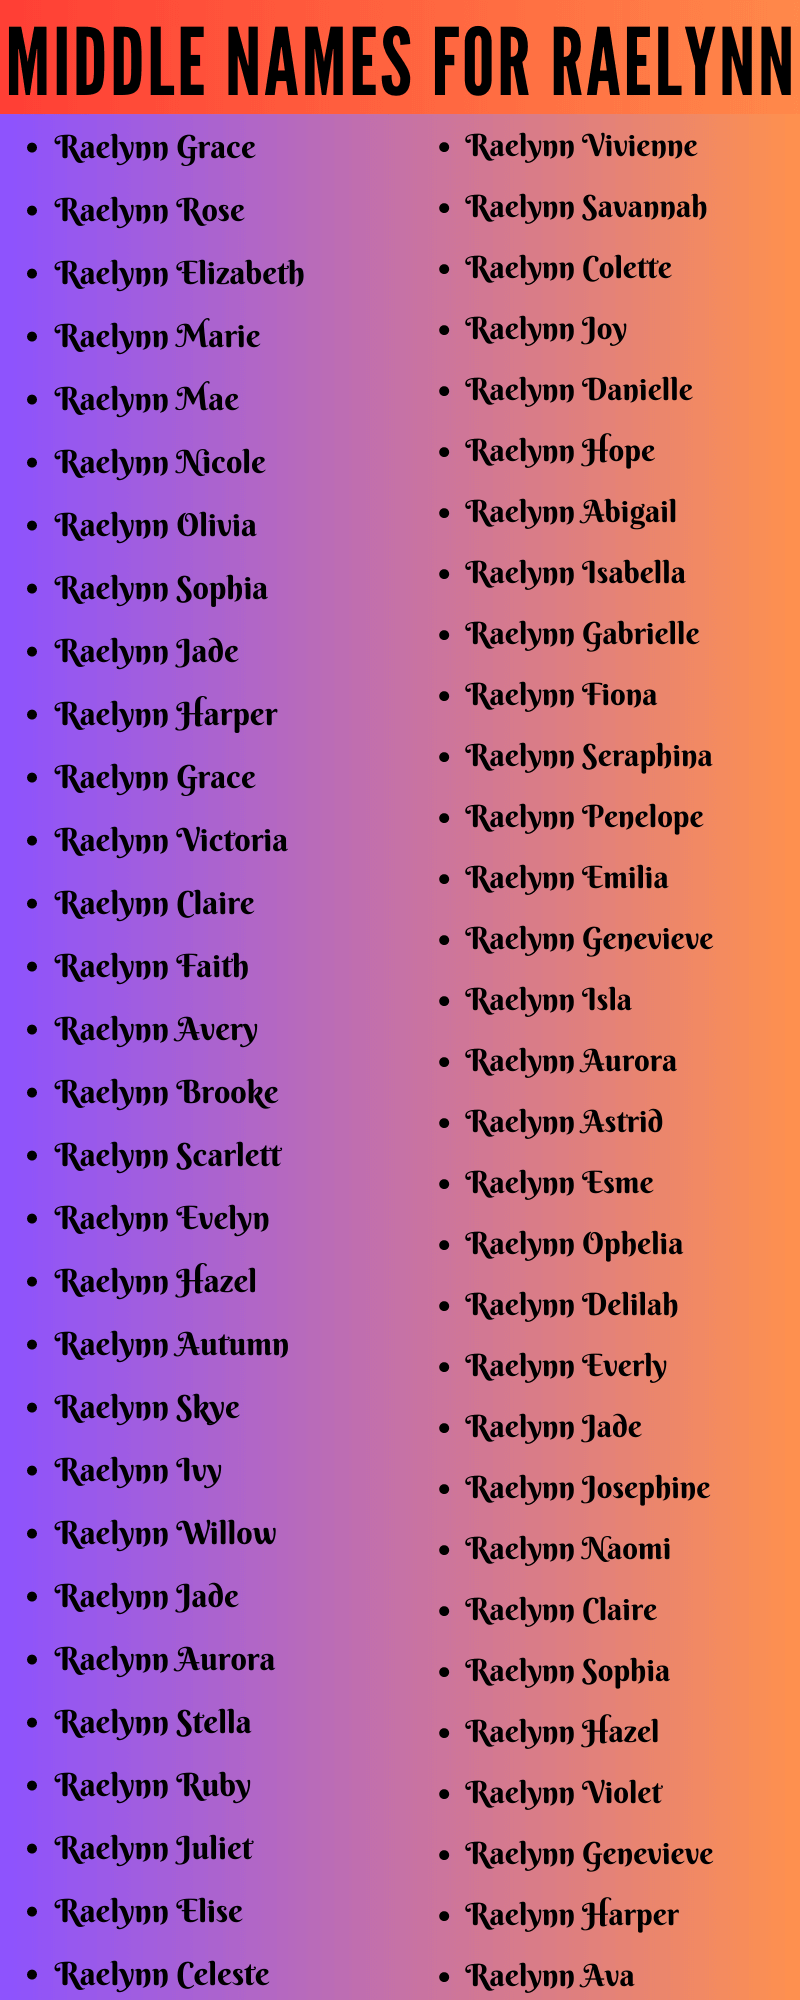 400 Best Middle Names For Raelynn That You Will Like